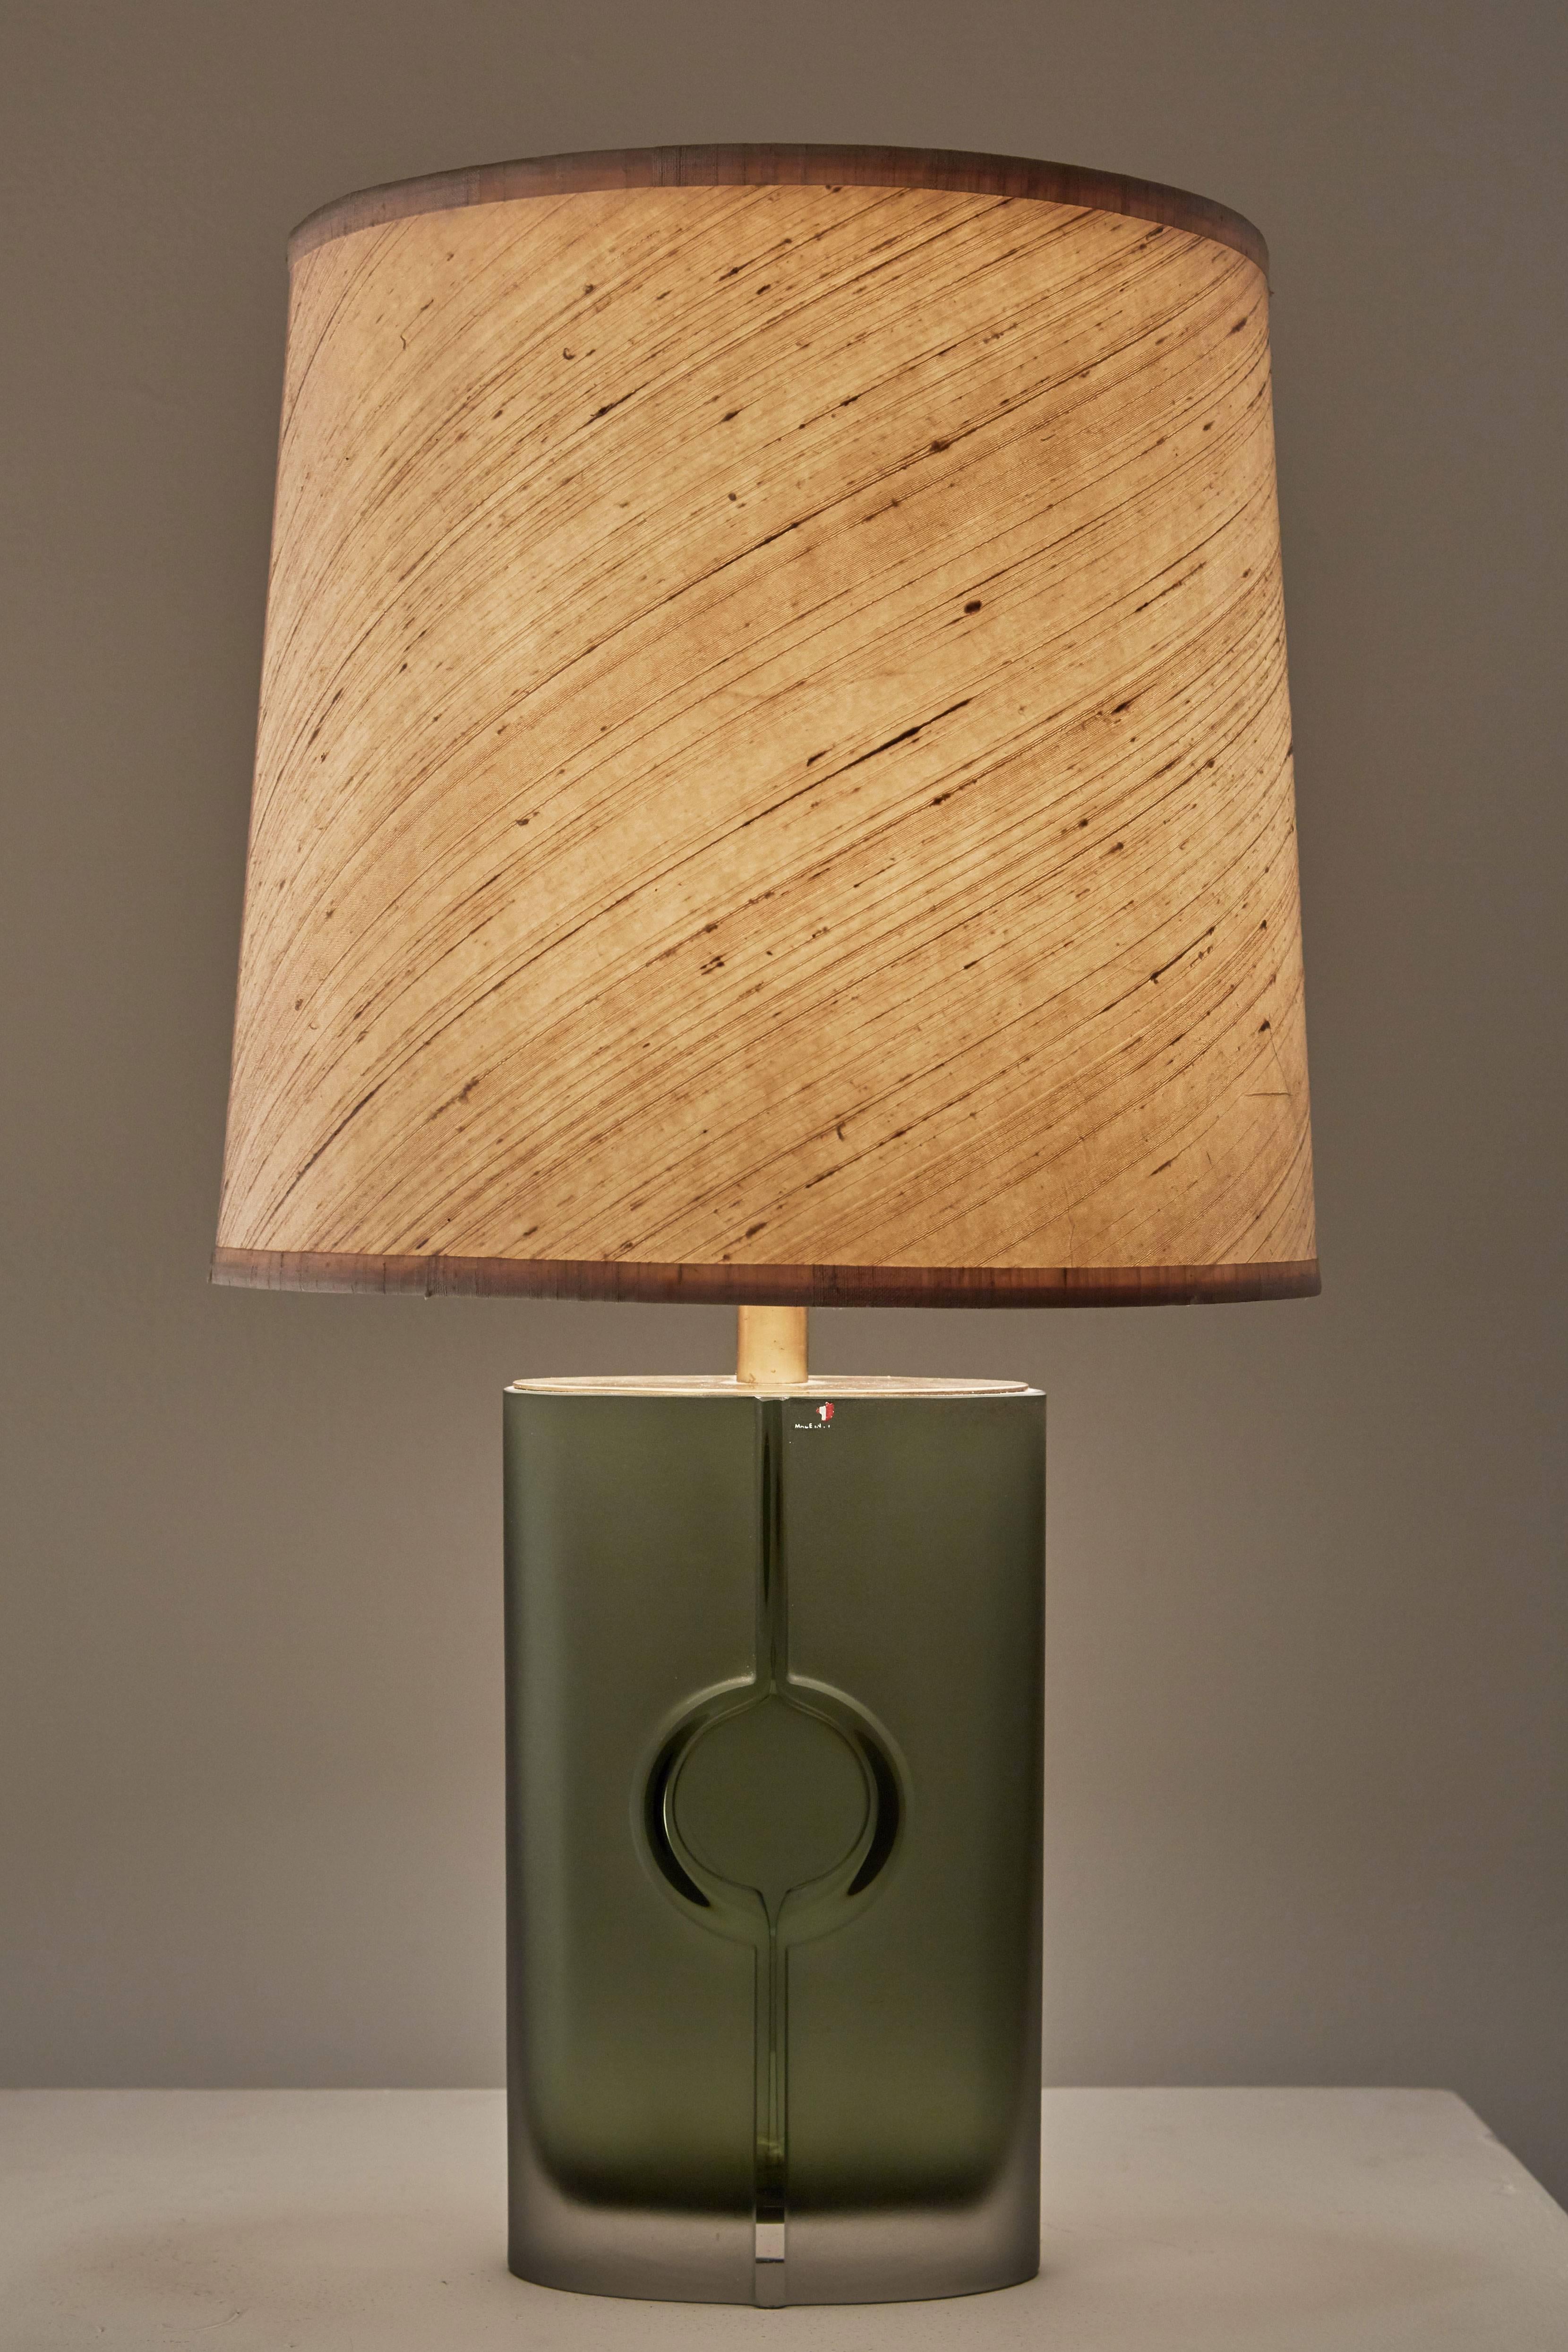 Glass table lamp by Tapio Wirkkala for Iittala in Finland, circa 1950s. Original silk shade, brass hardware. Engraved and numbered 2207 by Tapio Wirkkala. Original cord. Takes one E27 75w maximum bulb. Height displayed includes shade.
  